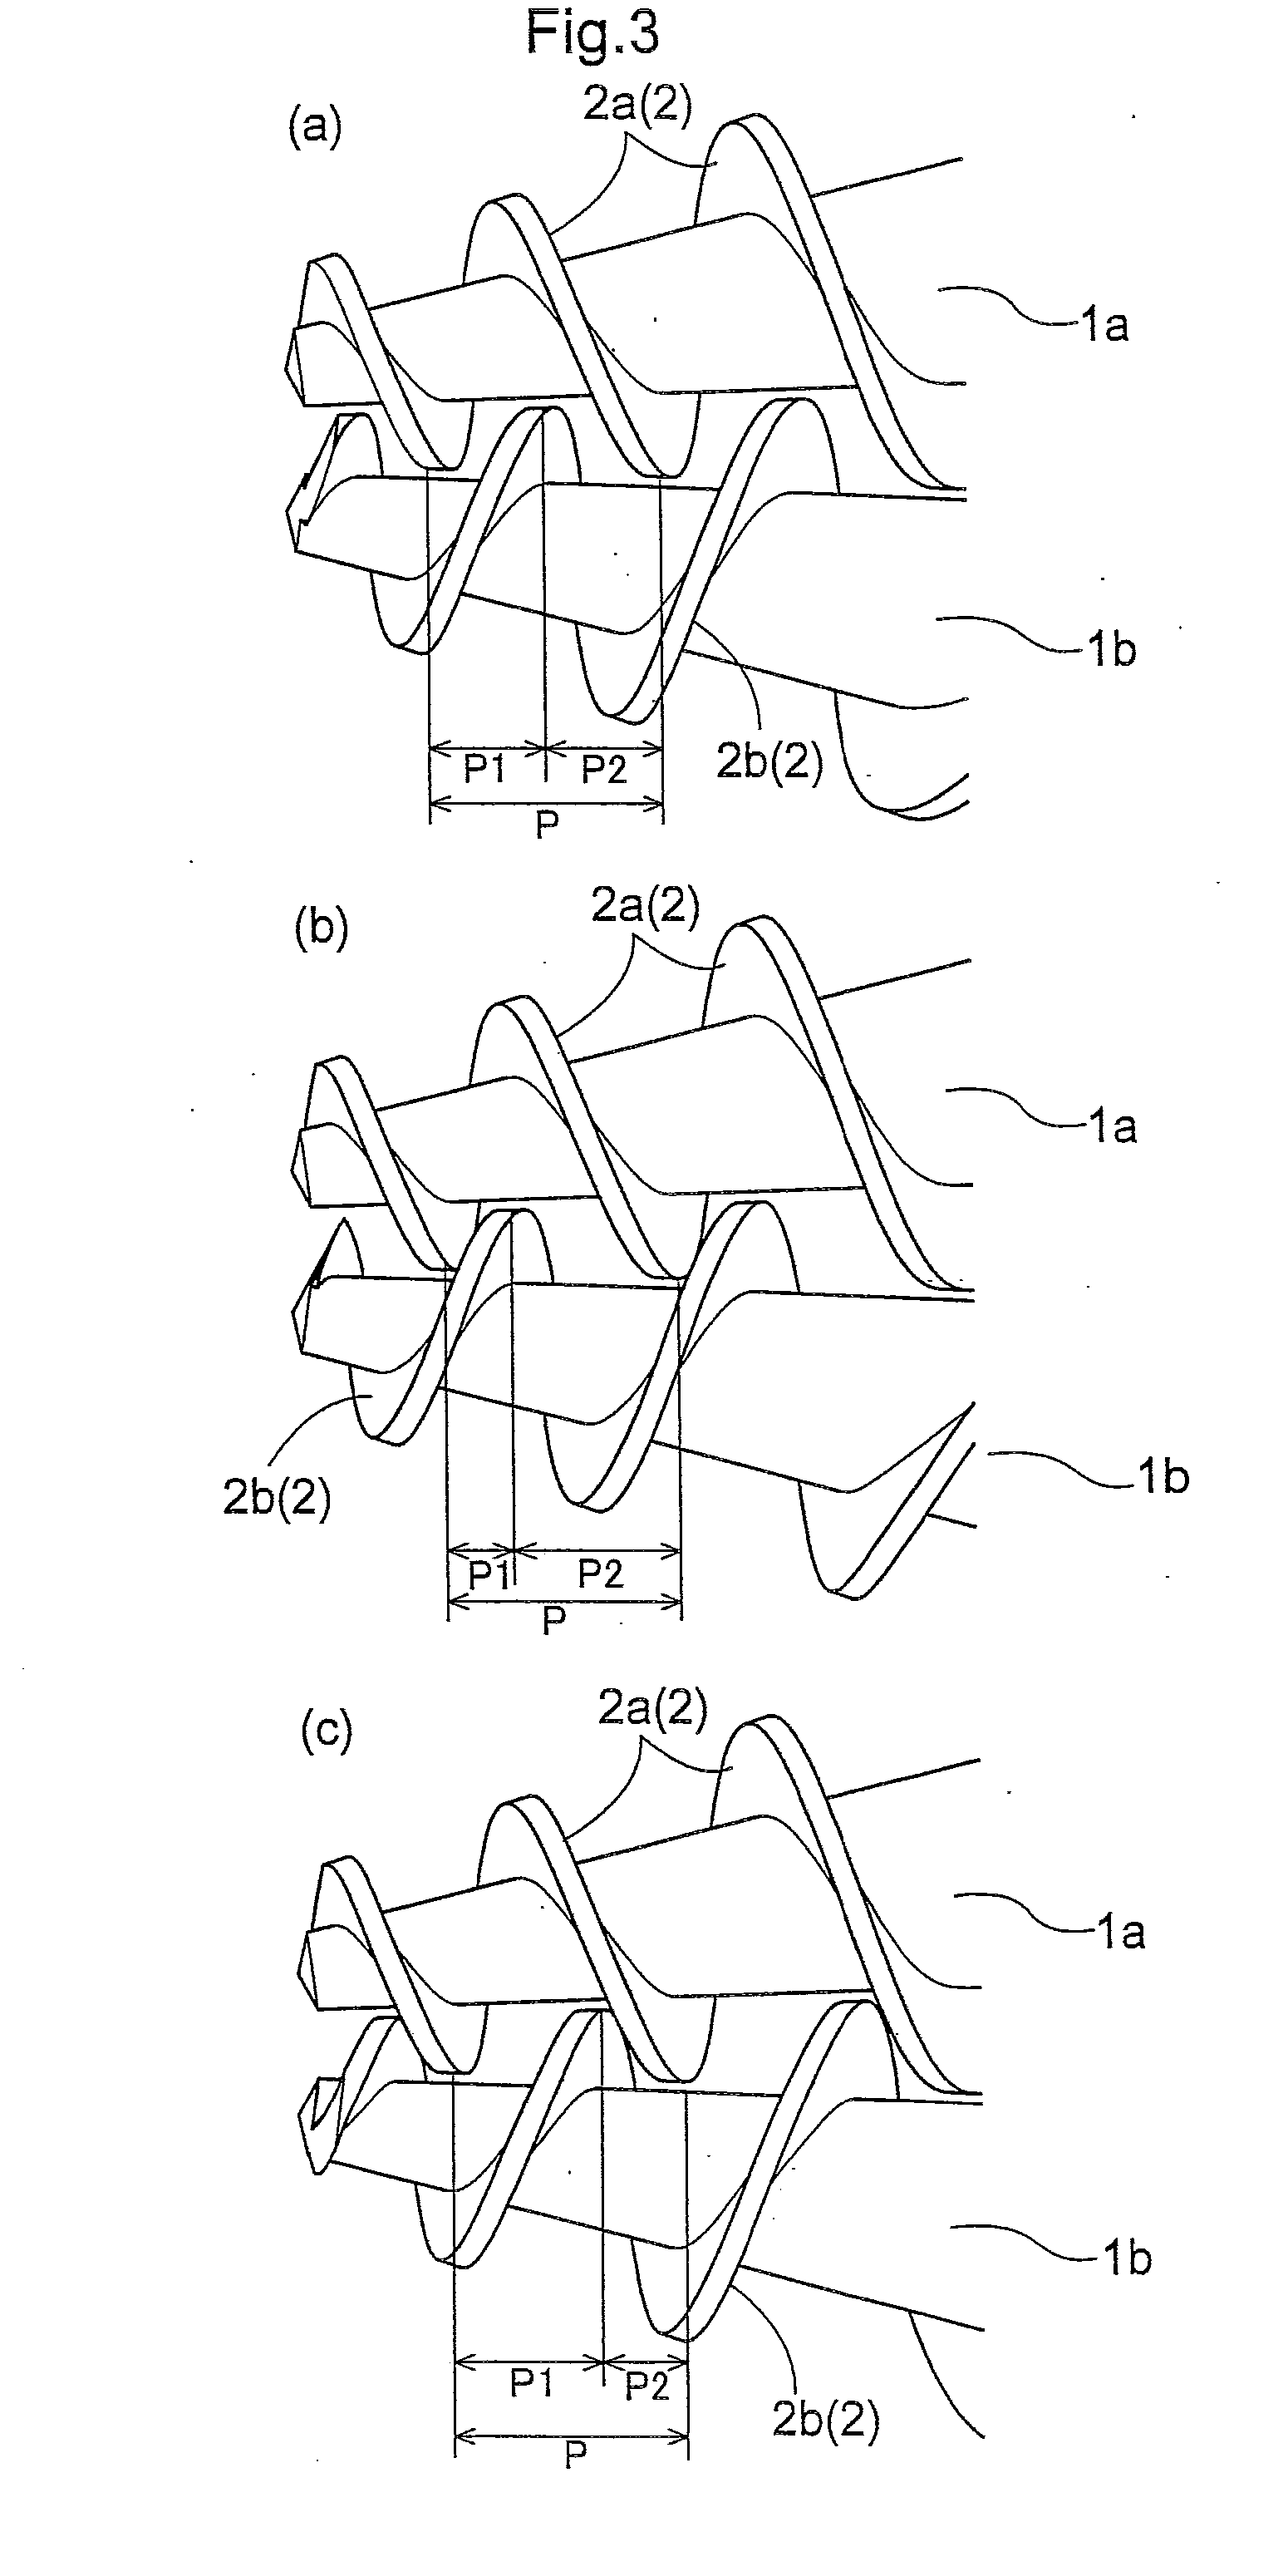 Two-shaft extruder